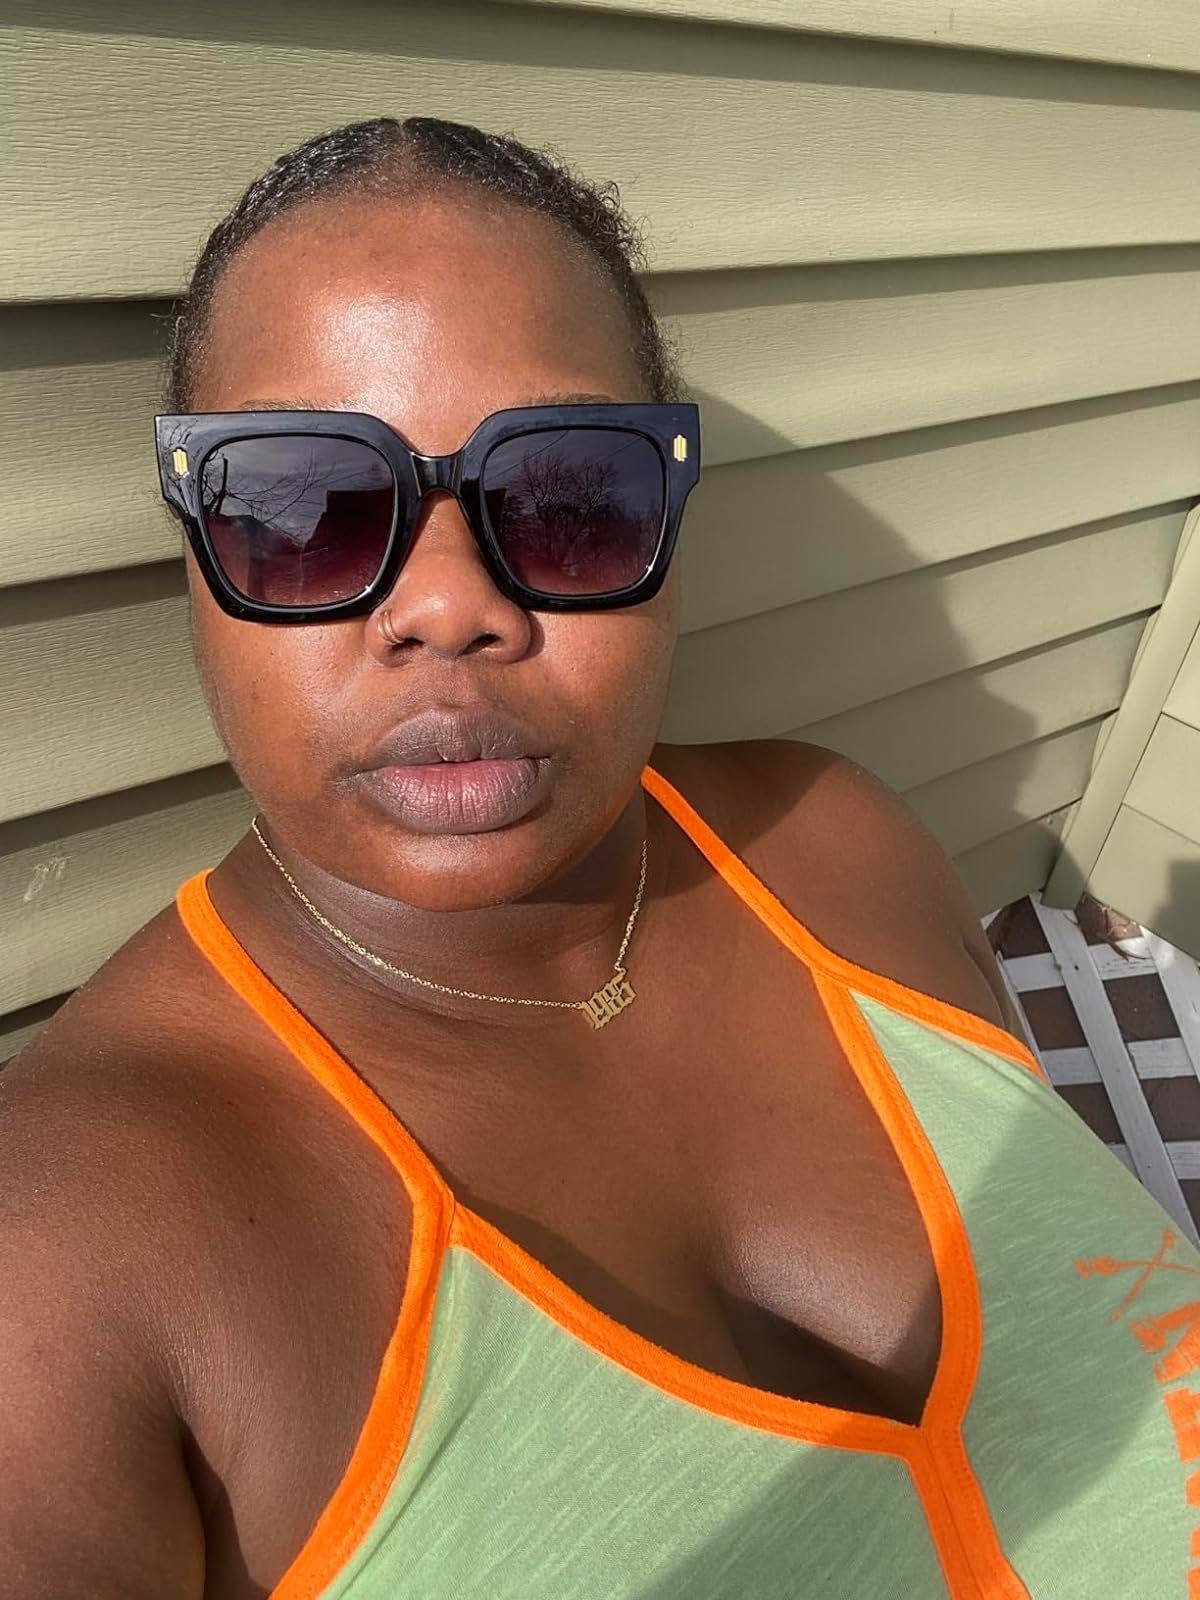 Reviewer in sunglasses and a green tank top with orange trim, taking a selfie in sunlight